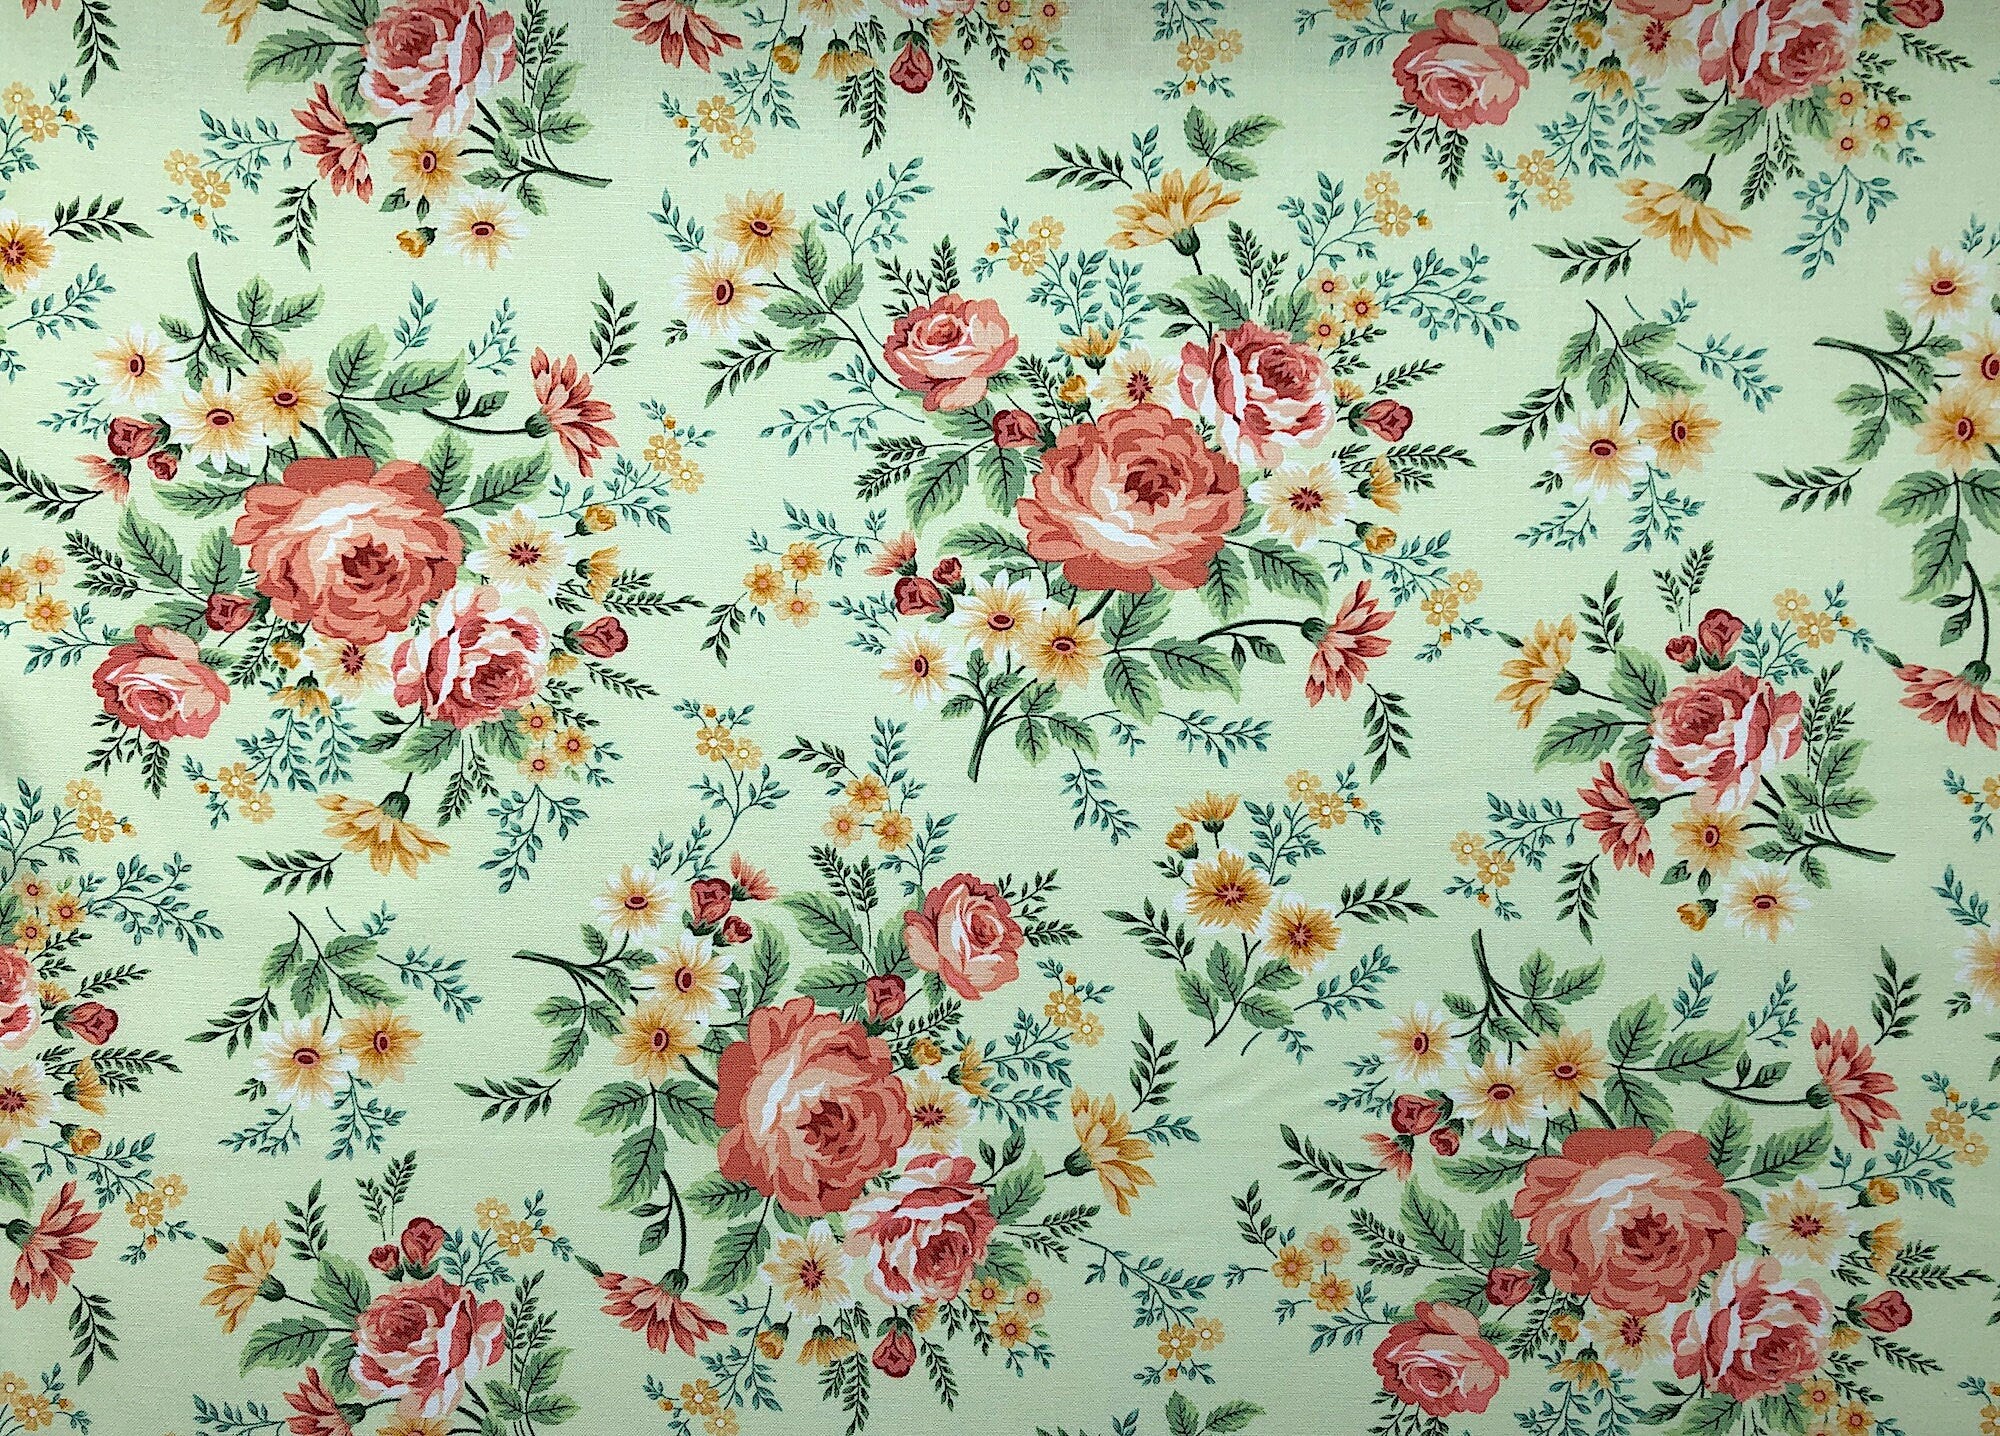 This fabric is called Spiced Garden and is covered with flowers and leaves. The flowers are shades of peach and yellow